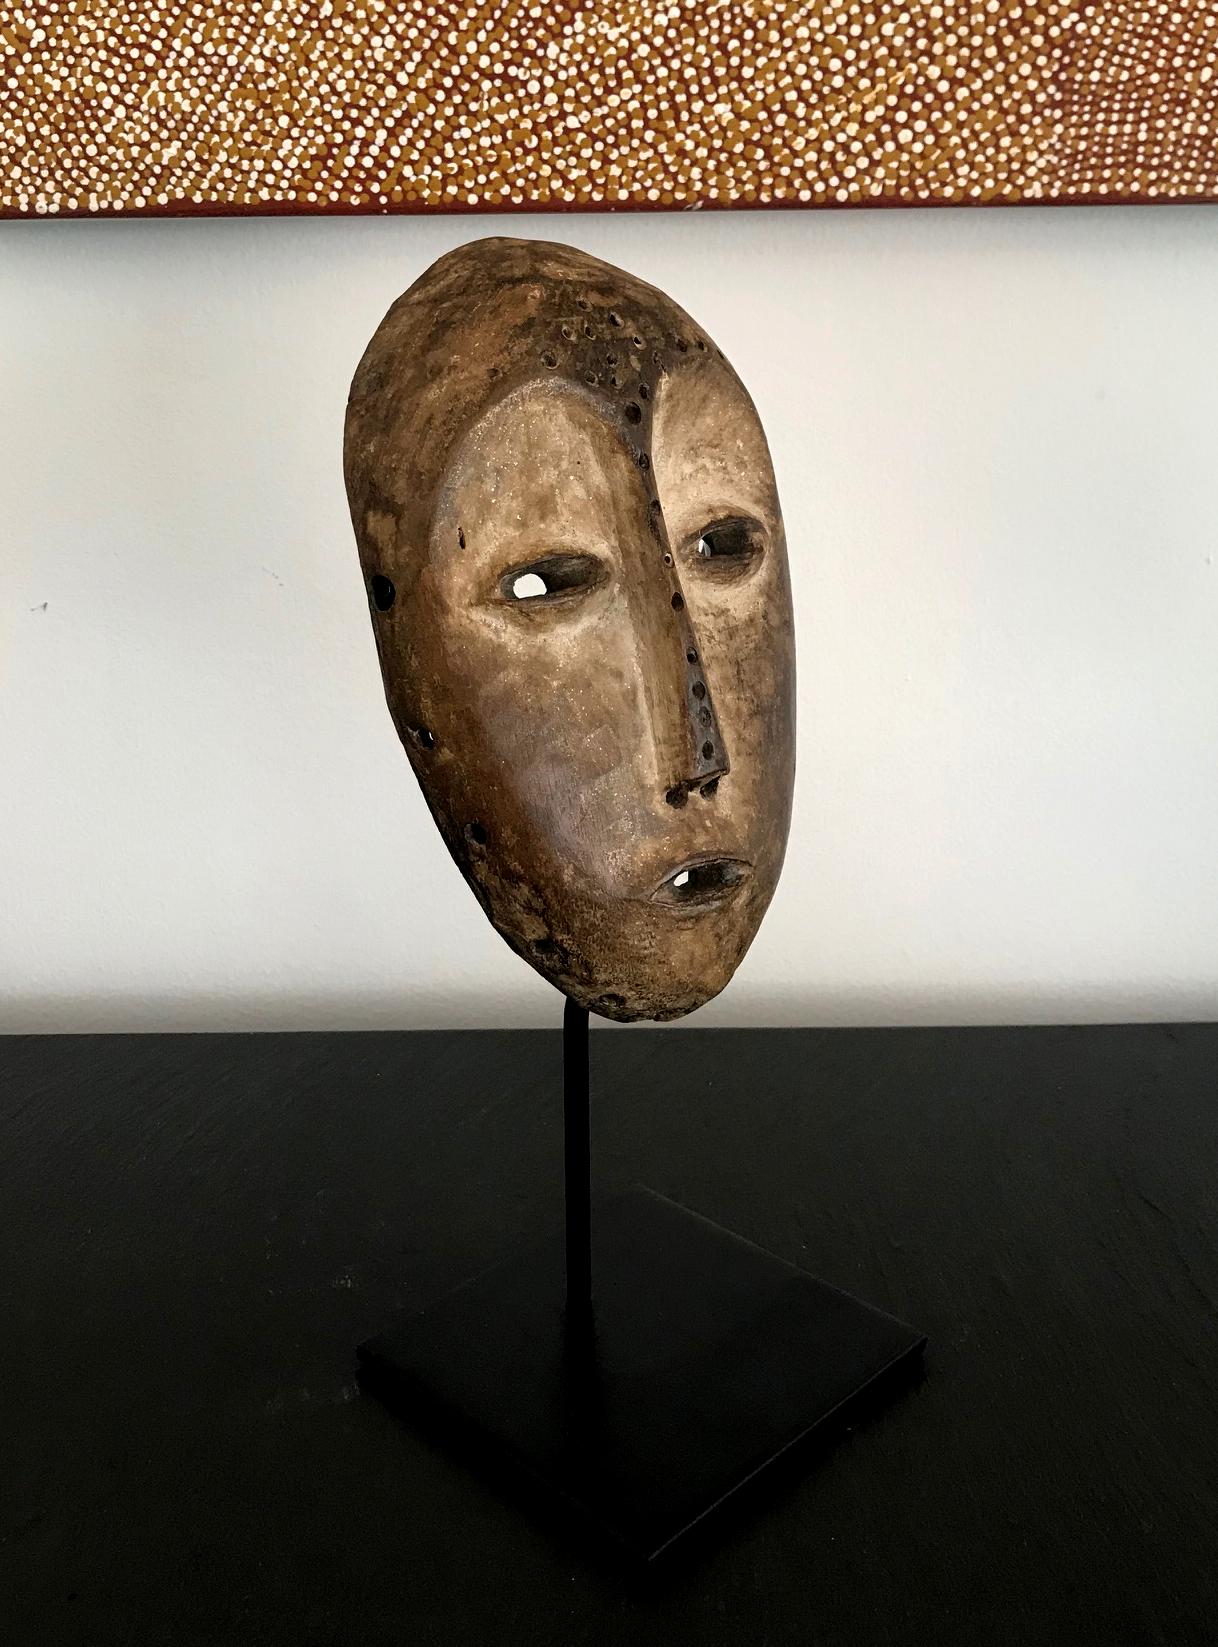 On offer is a Lega Bwami society wooden mask from the Democratic Republic of the Congo. It was likely from the first half of the 20th century and an authentic in-field piece. The mask displays a nice patina on both the front and back sides, and the